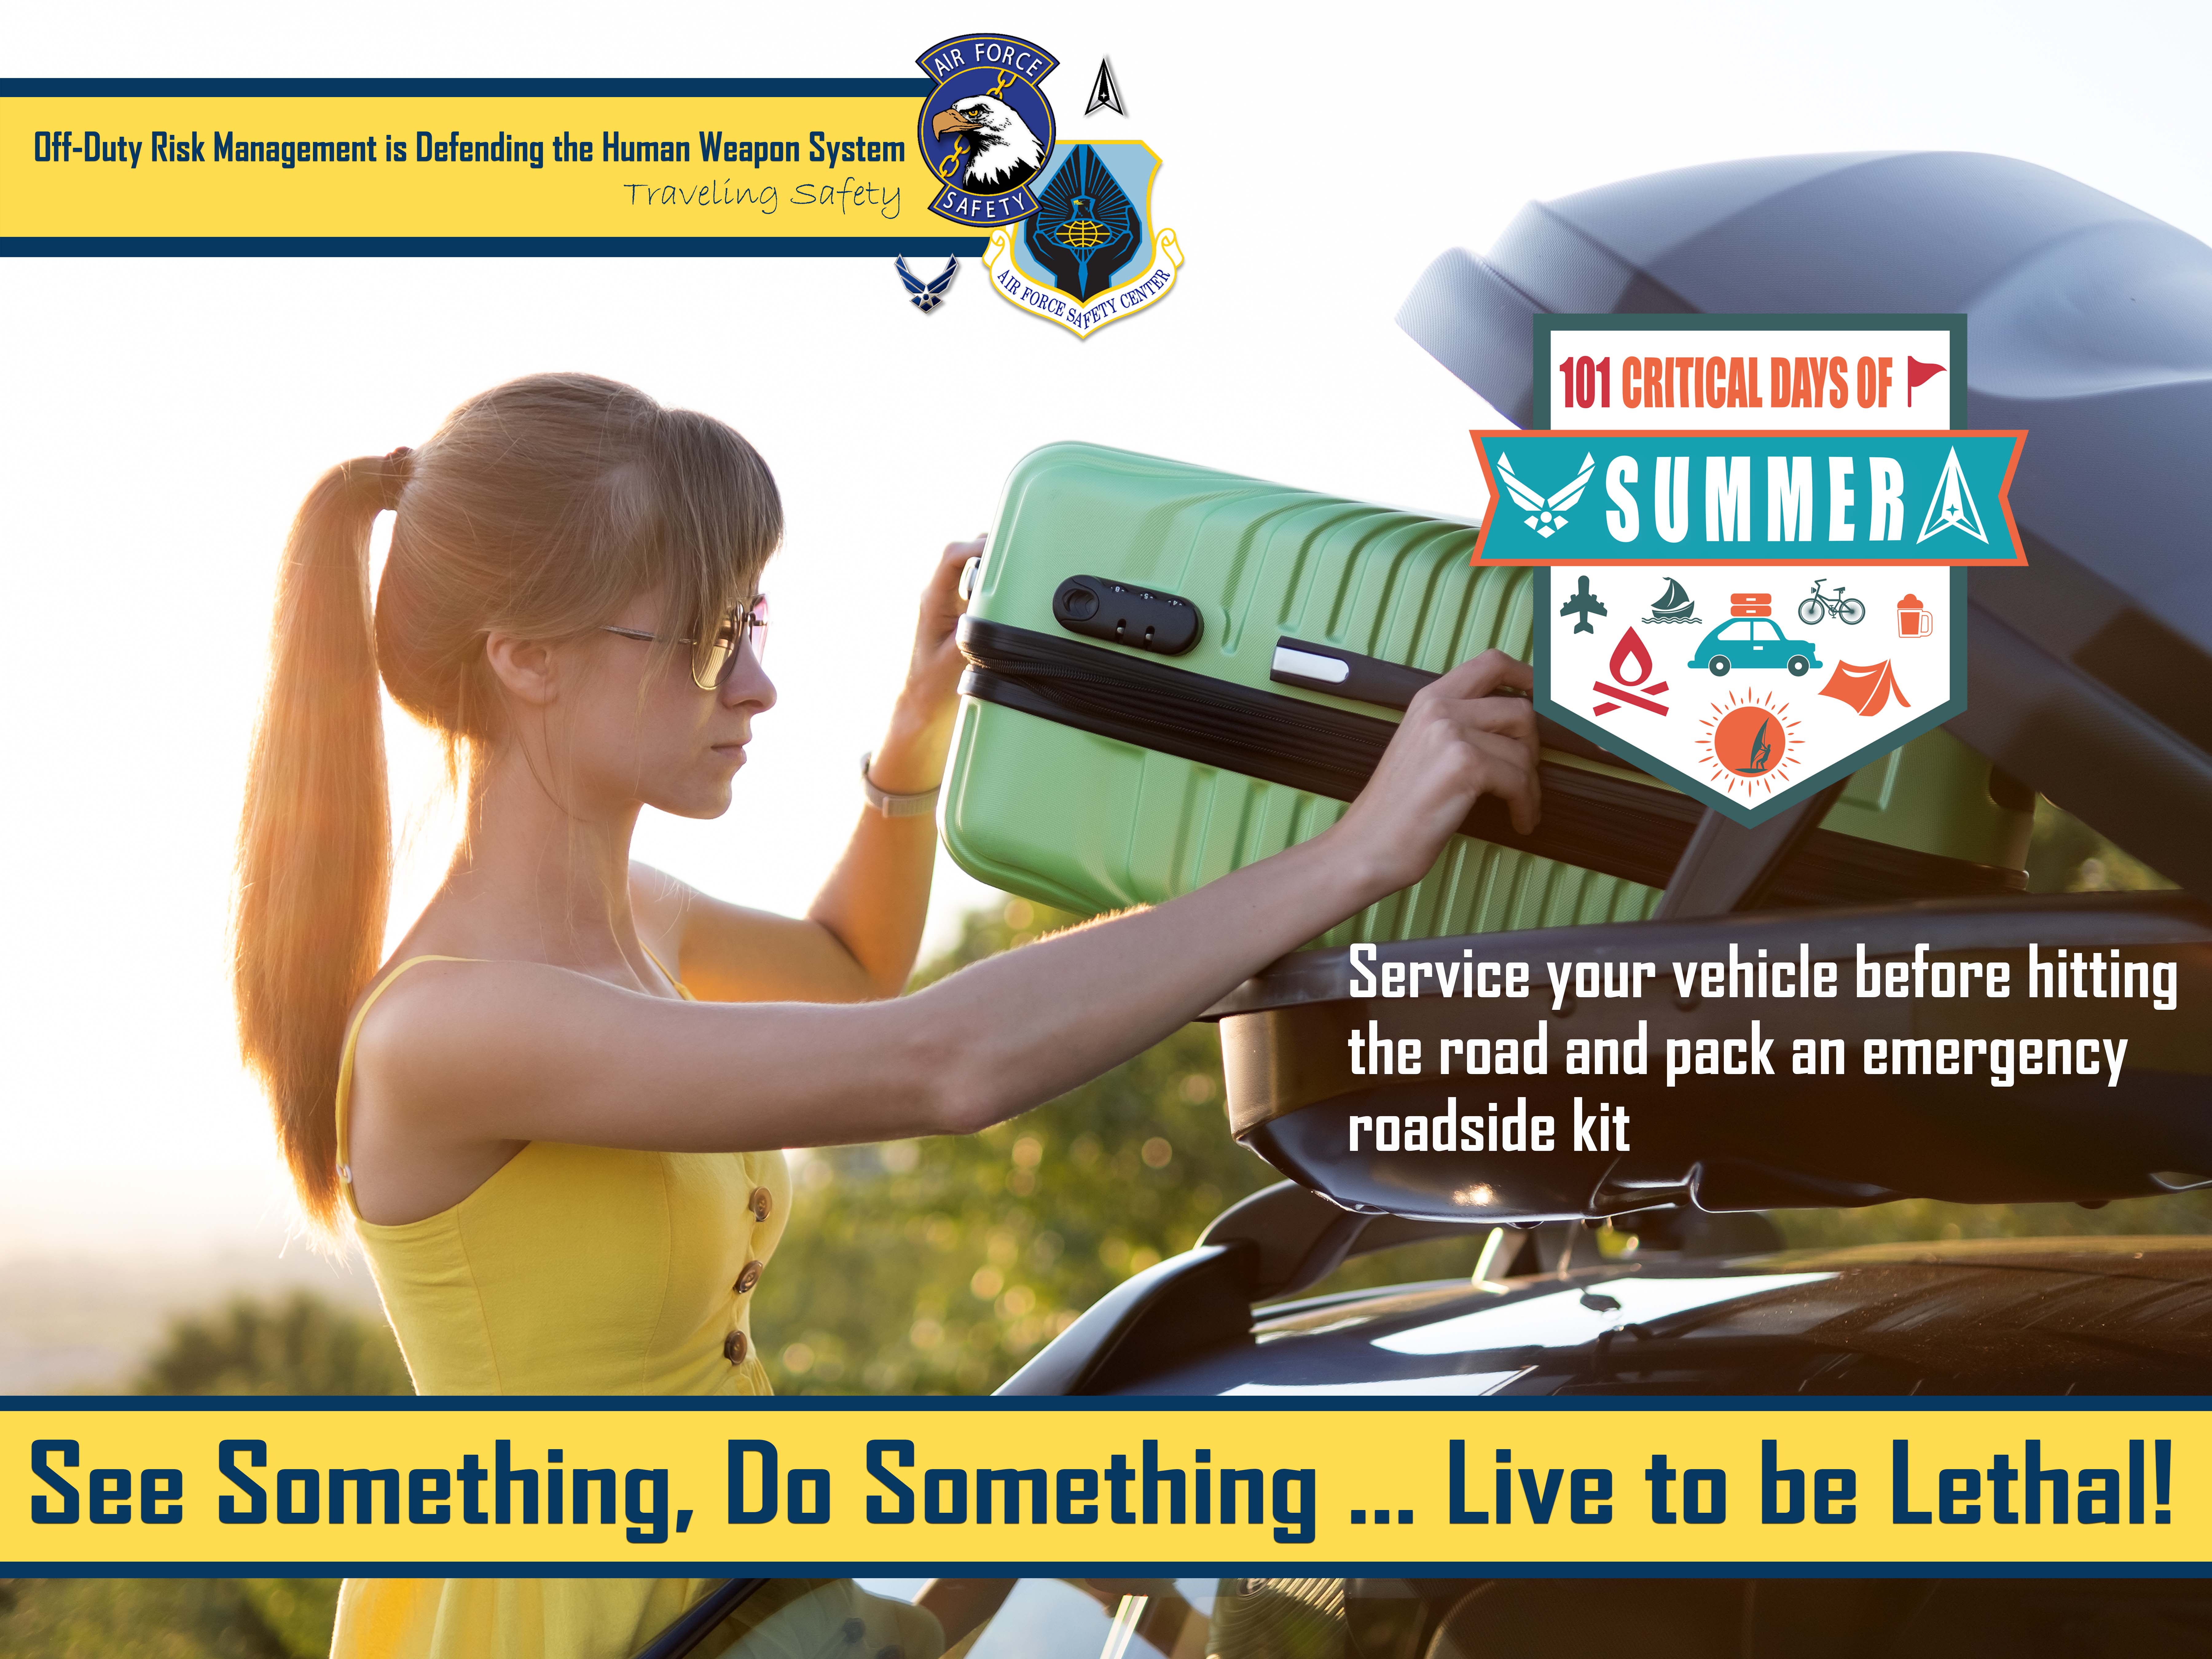 Travel Safety Poster - female packing luggage into vehicle roof carrier.